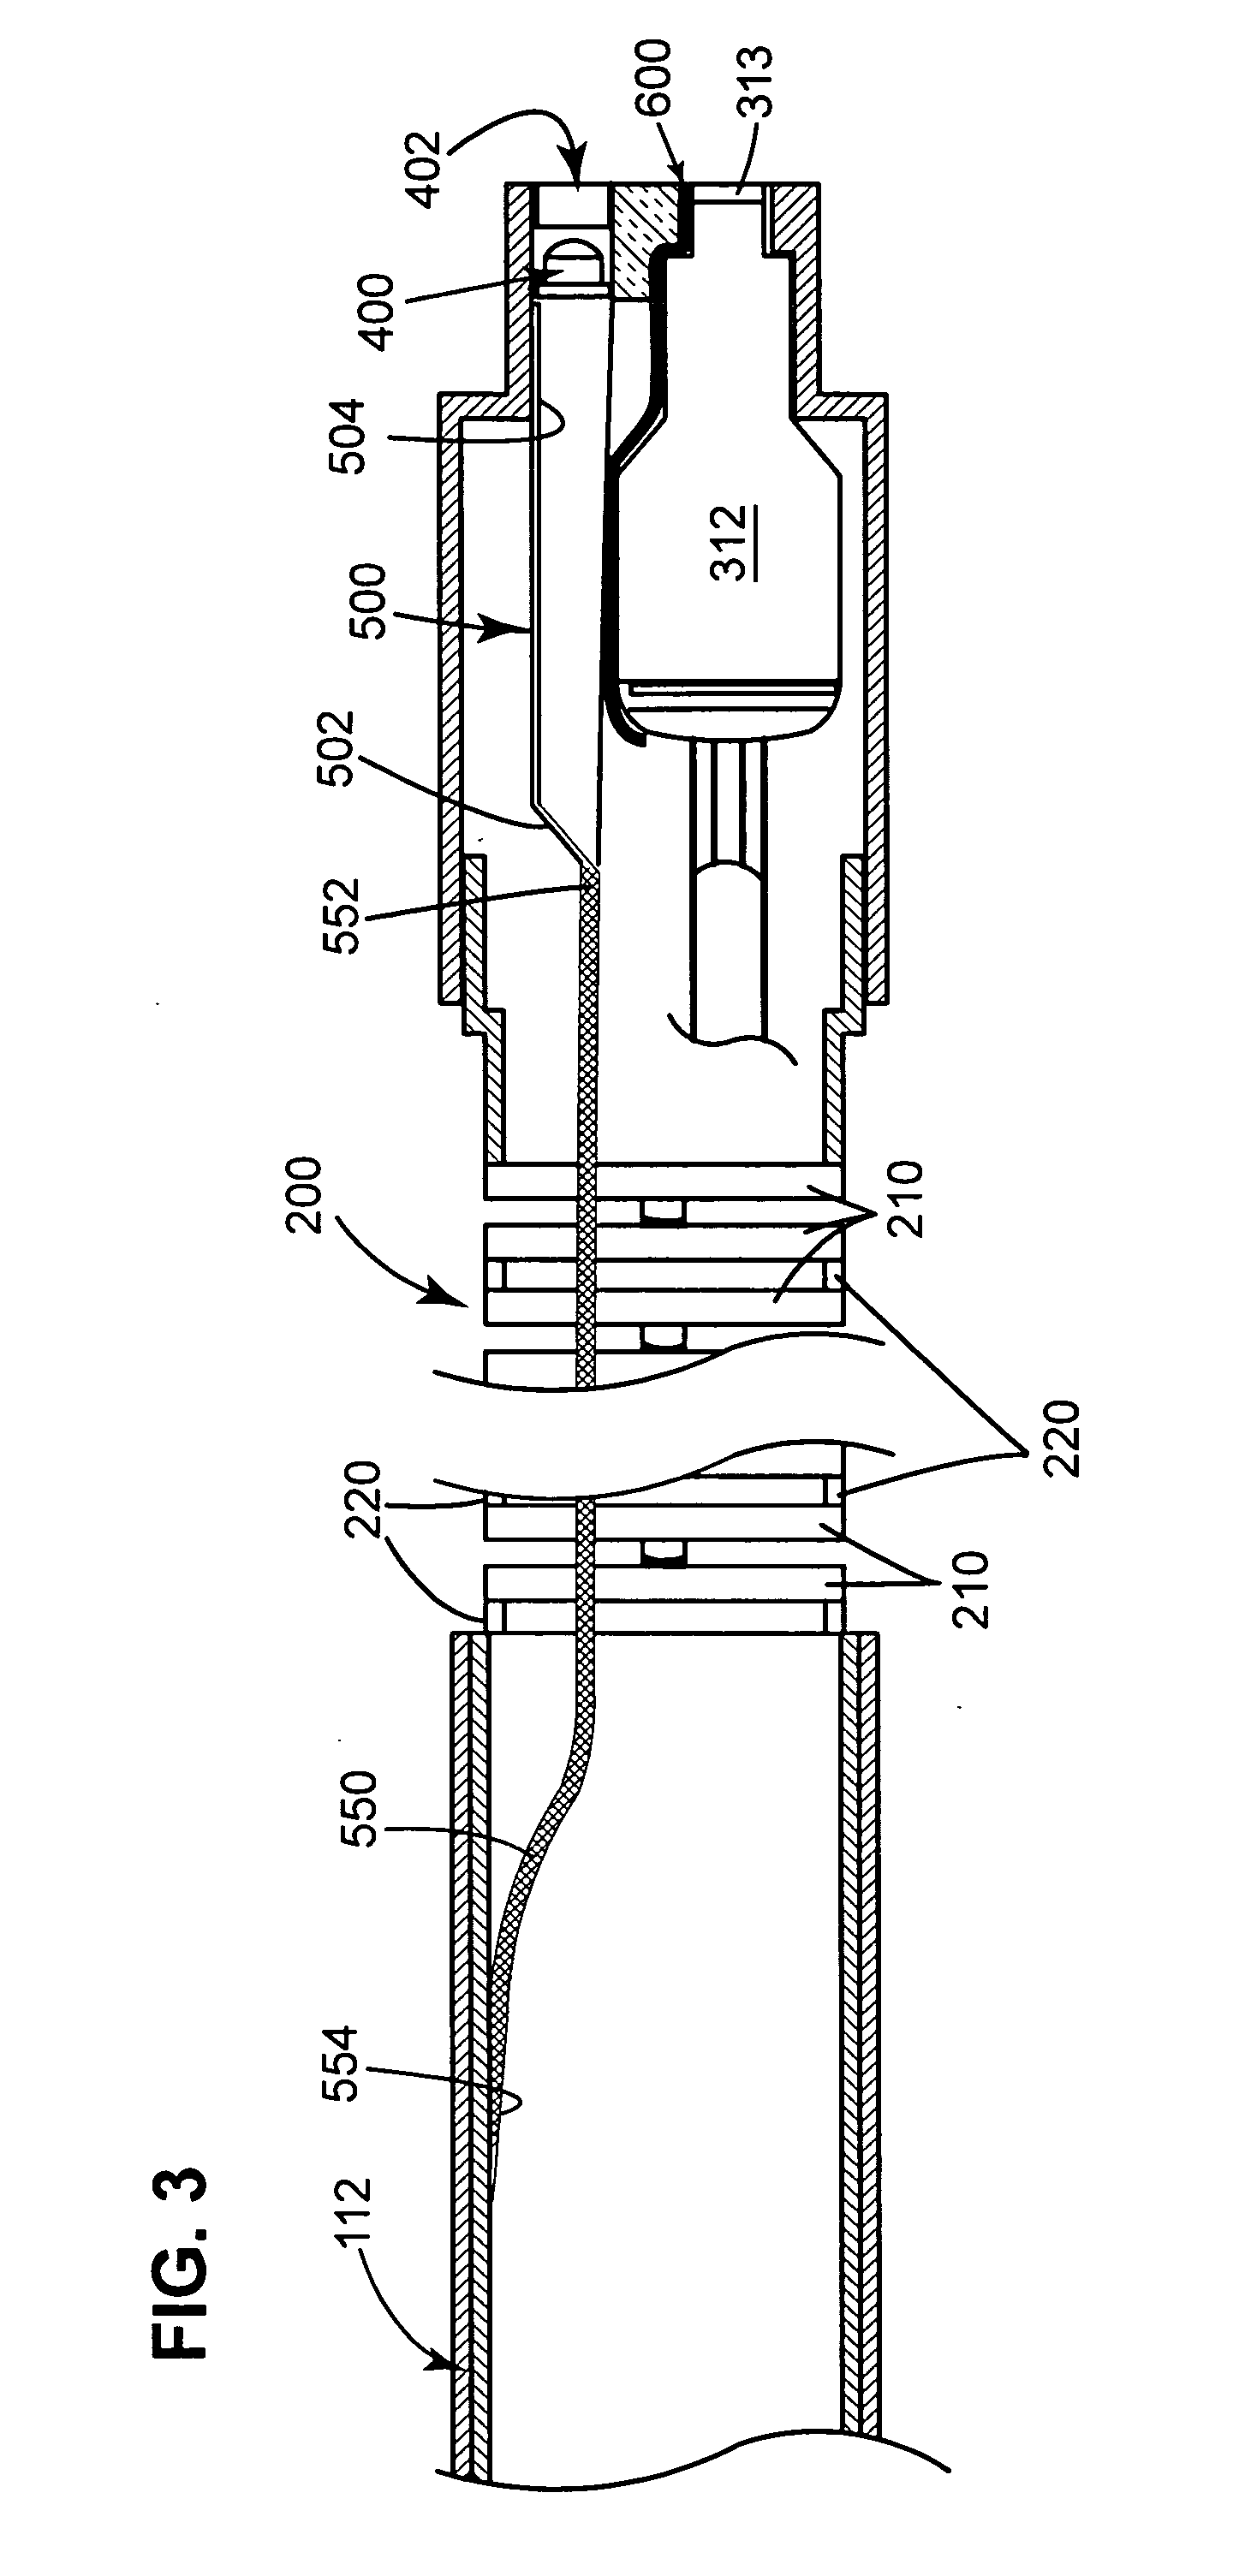 Heat protection systems and methods for remote viewing devices